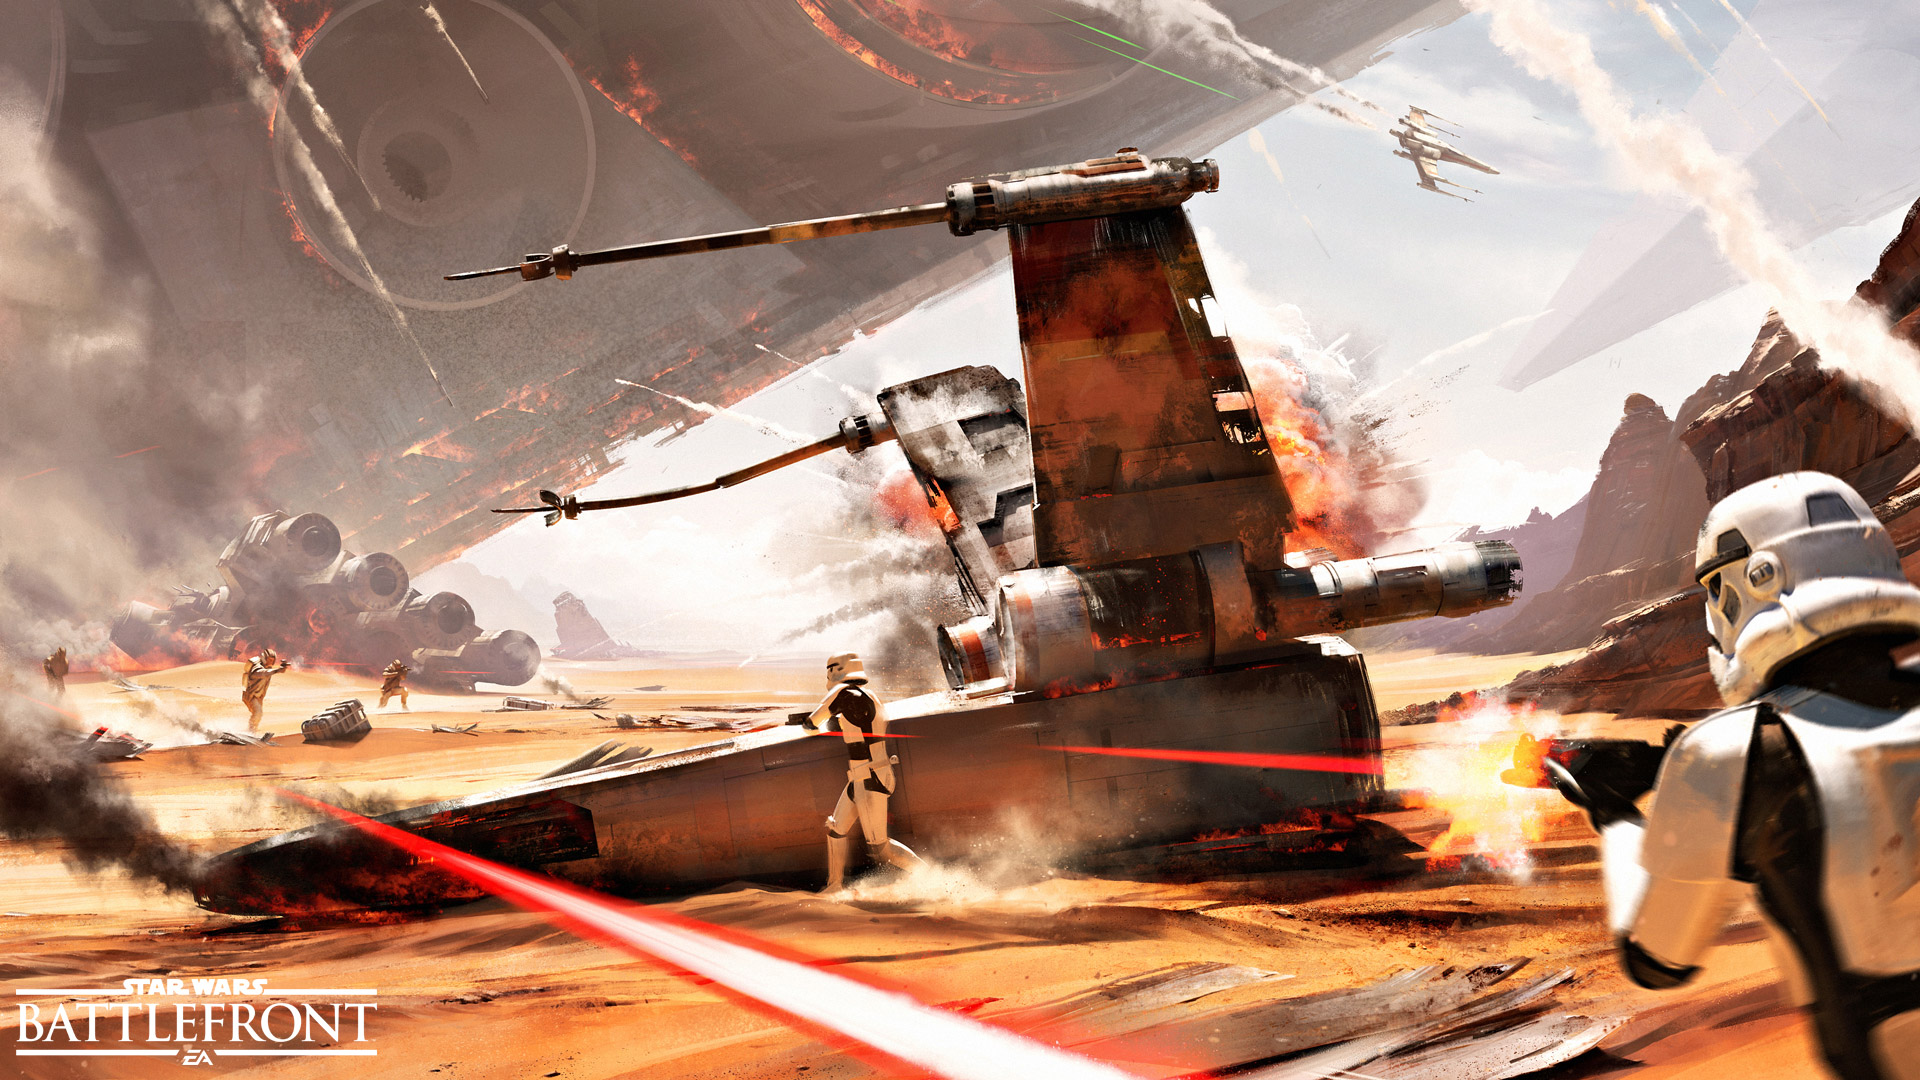 By Stephen Ments Off On Star Wars Battlefront HD Wallpaper